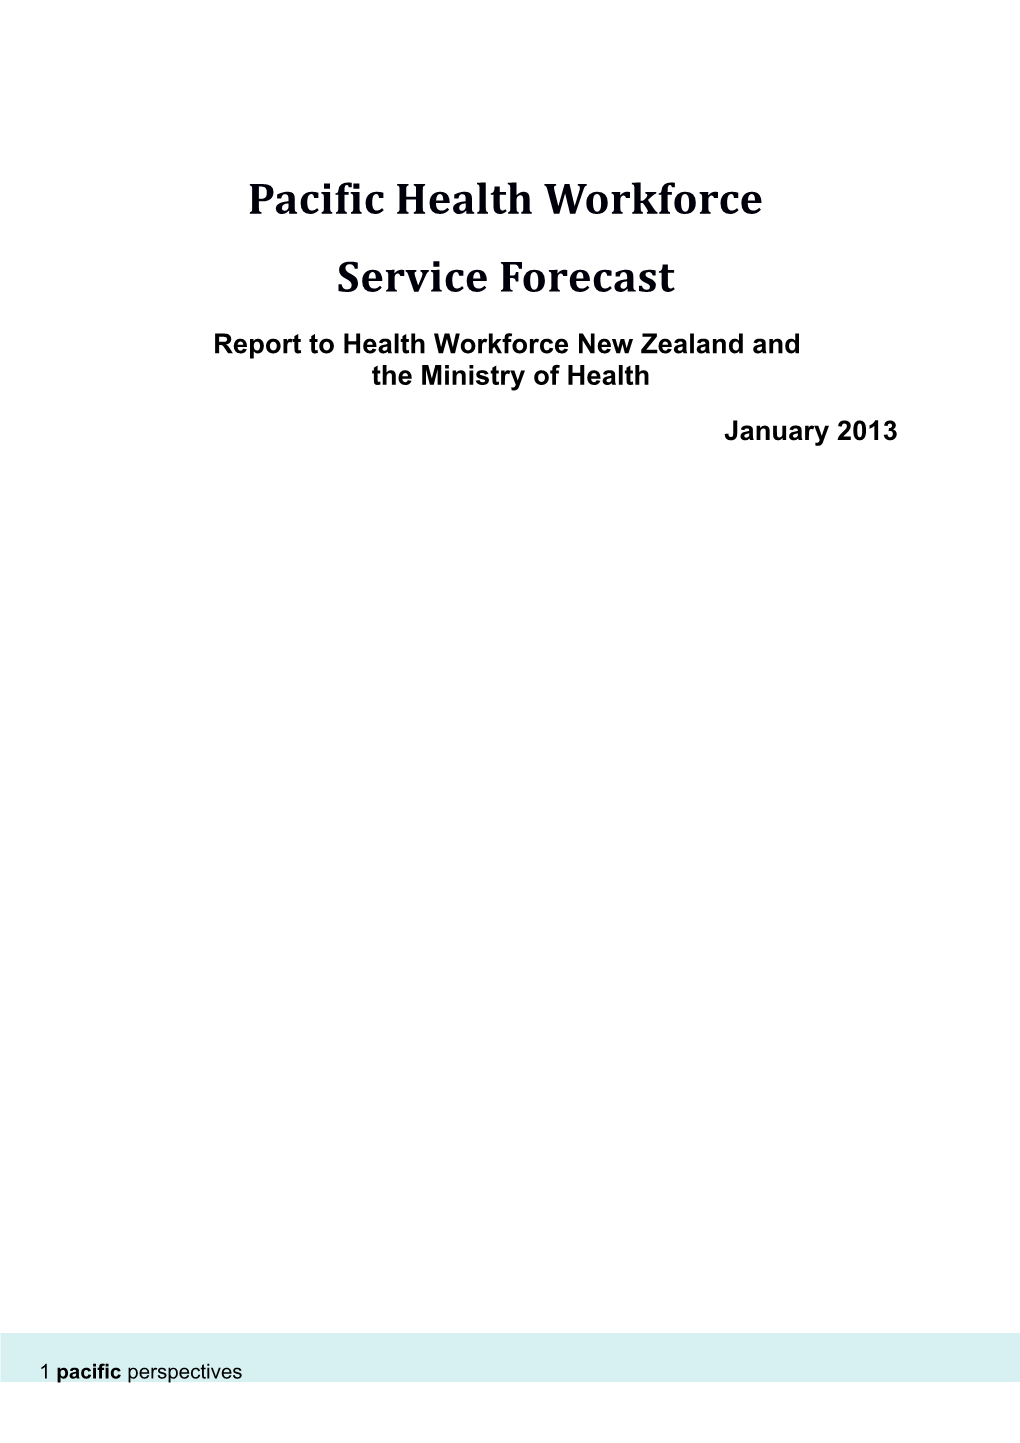 Pacific Health Workforce Service Forecast